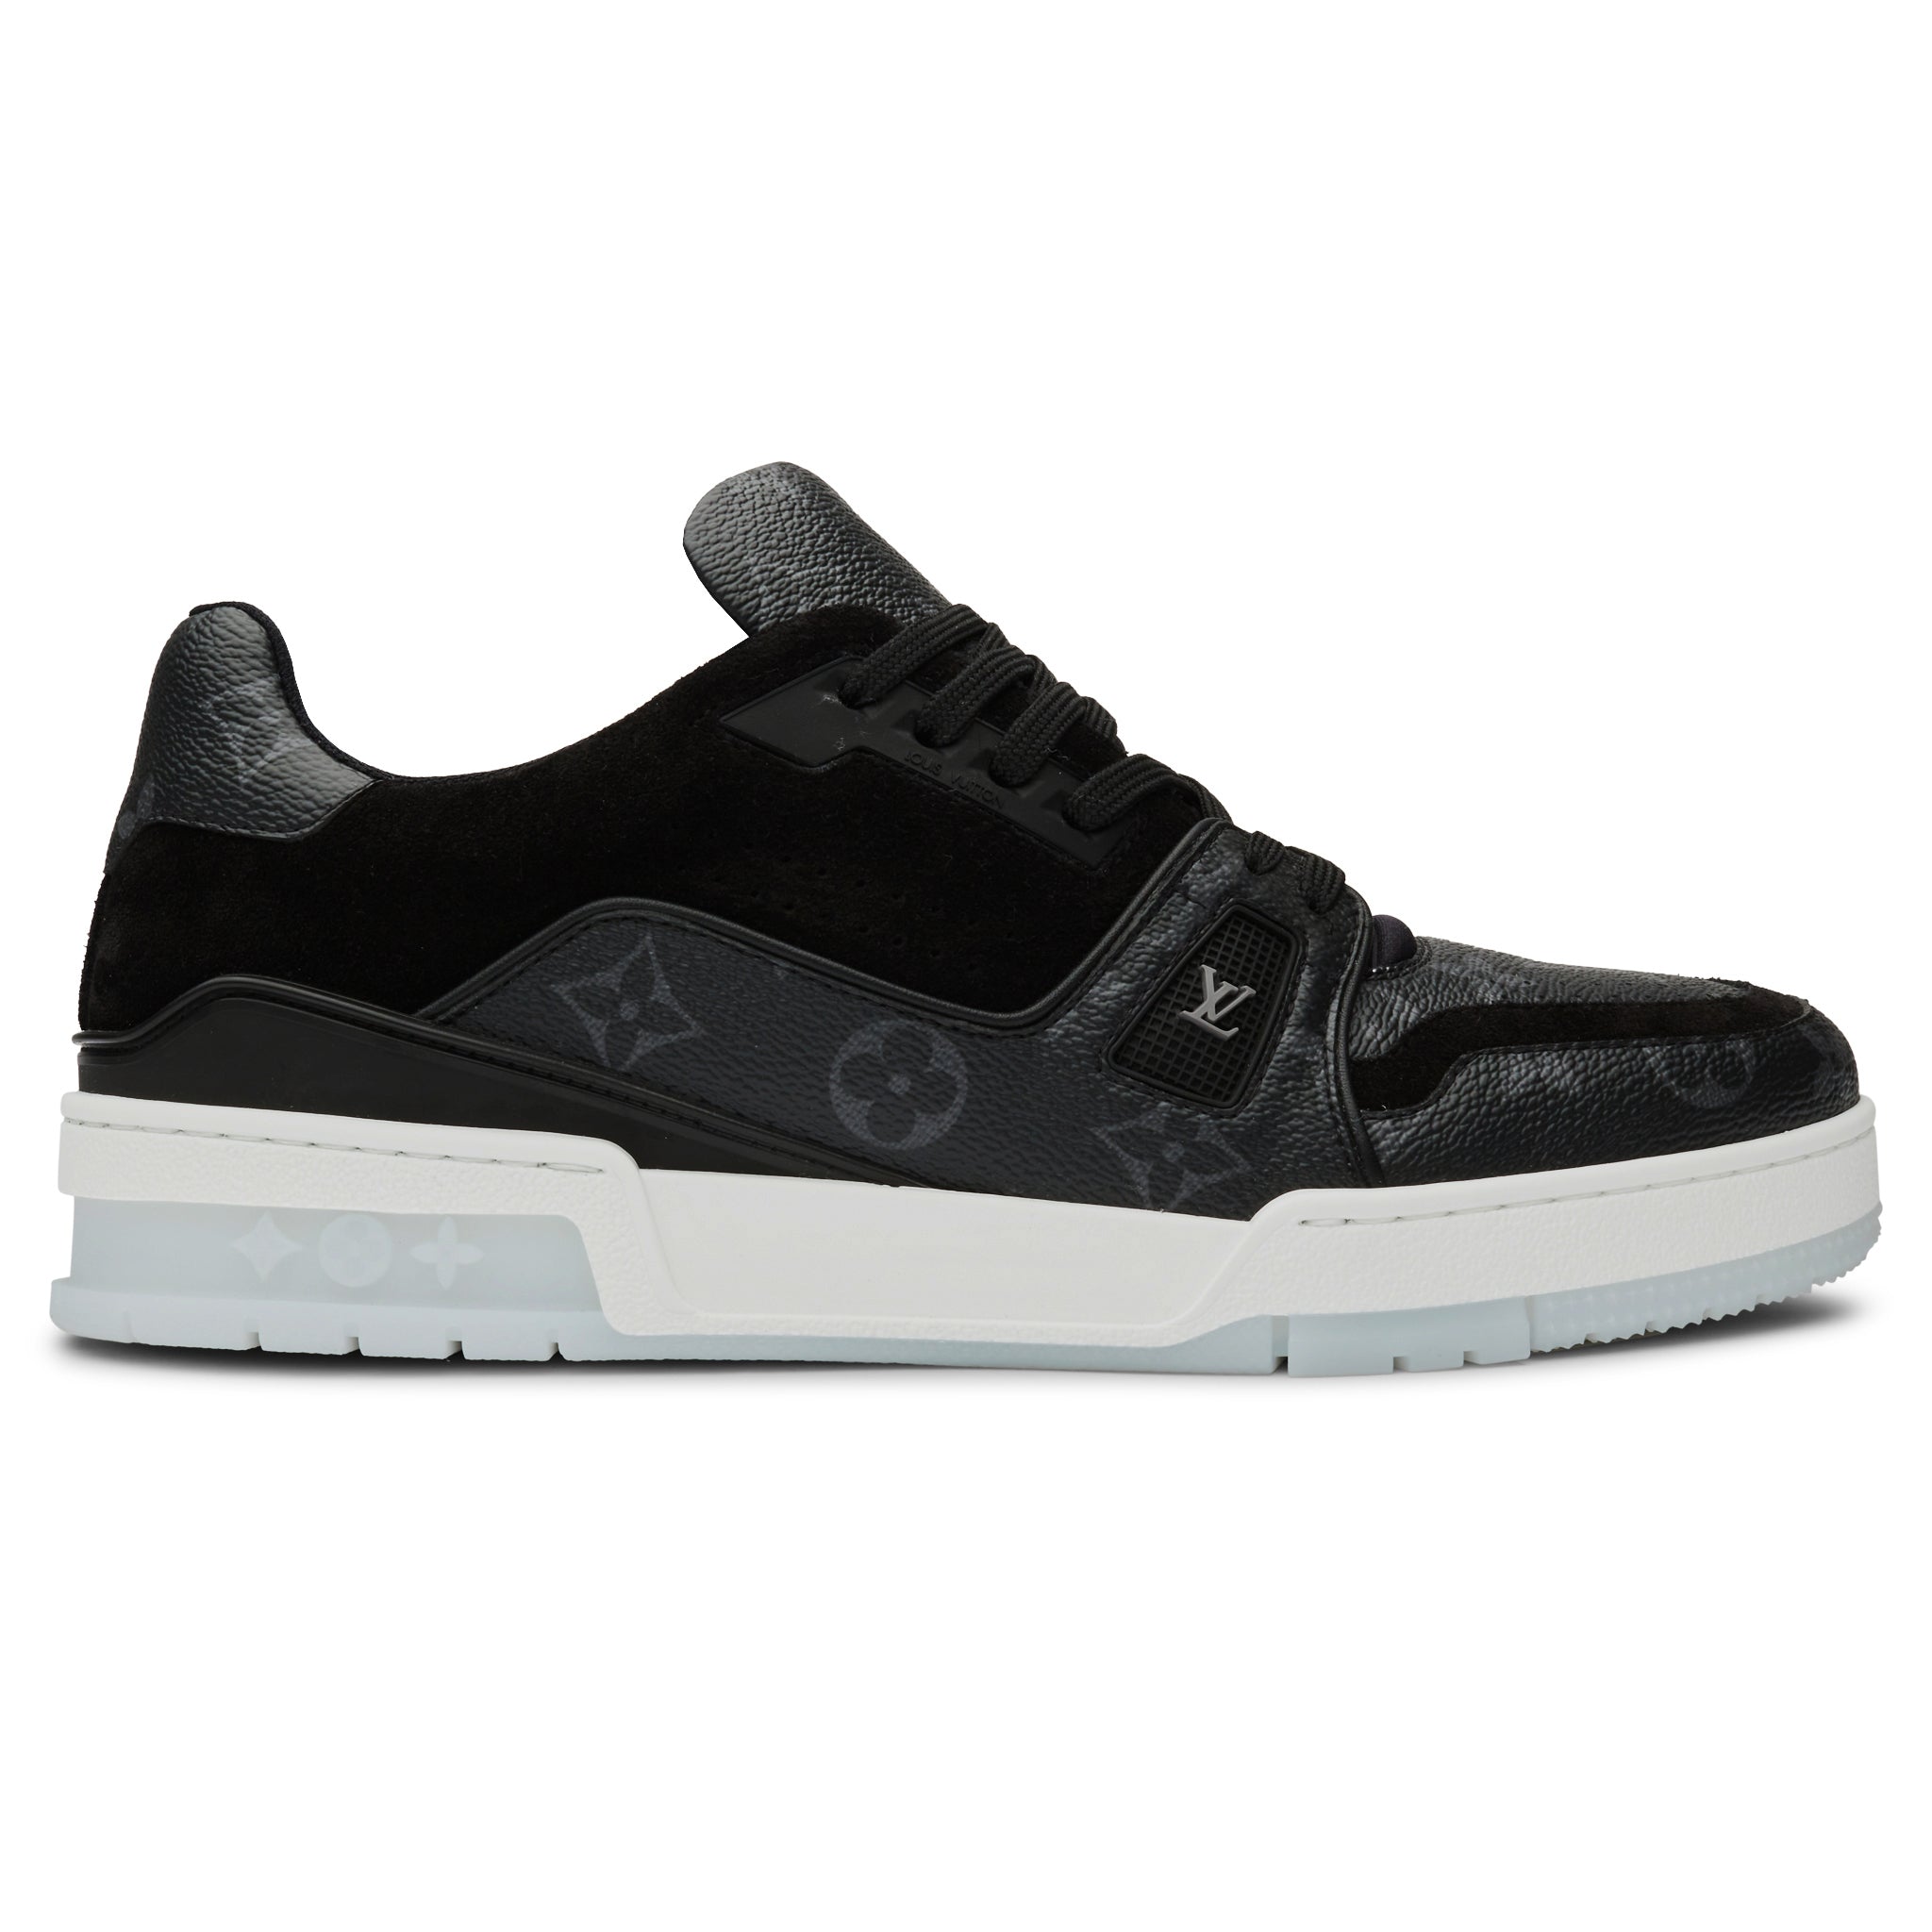 Lv trainer low trainers Louis Vuitton Black size 45 EU in Other - 33114992